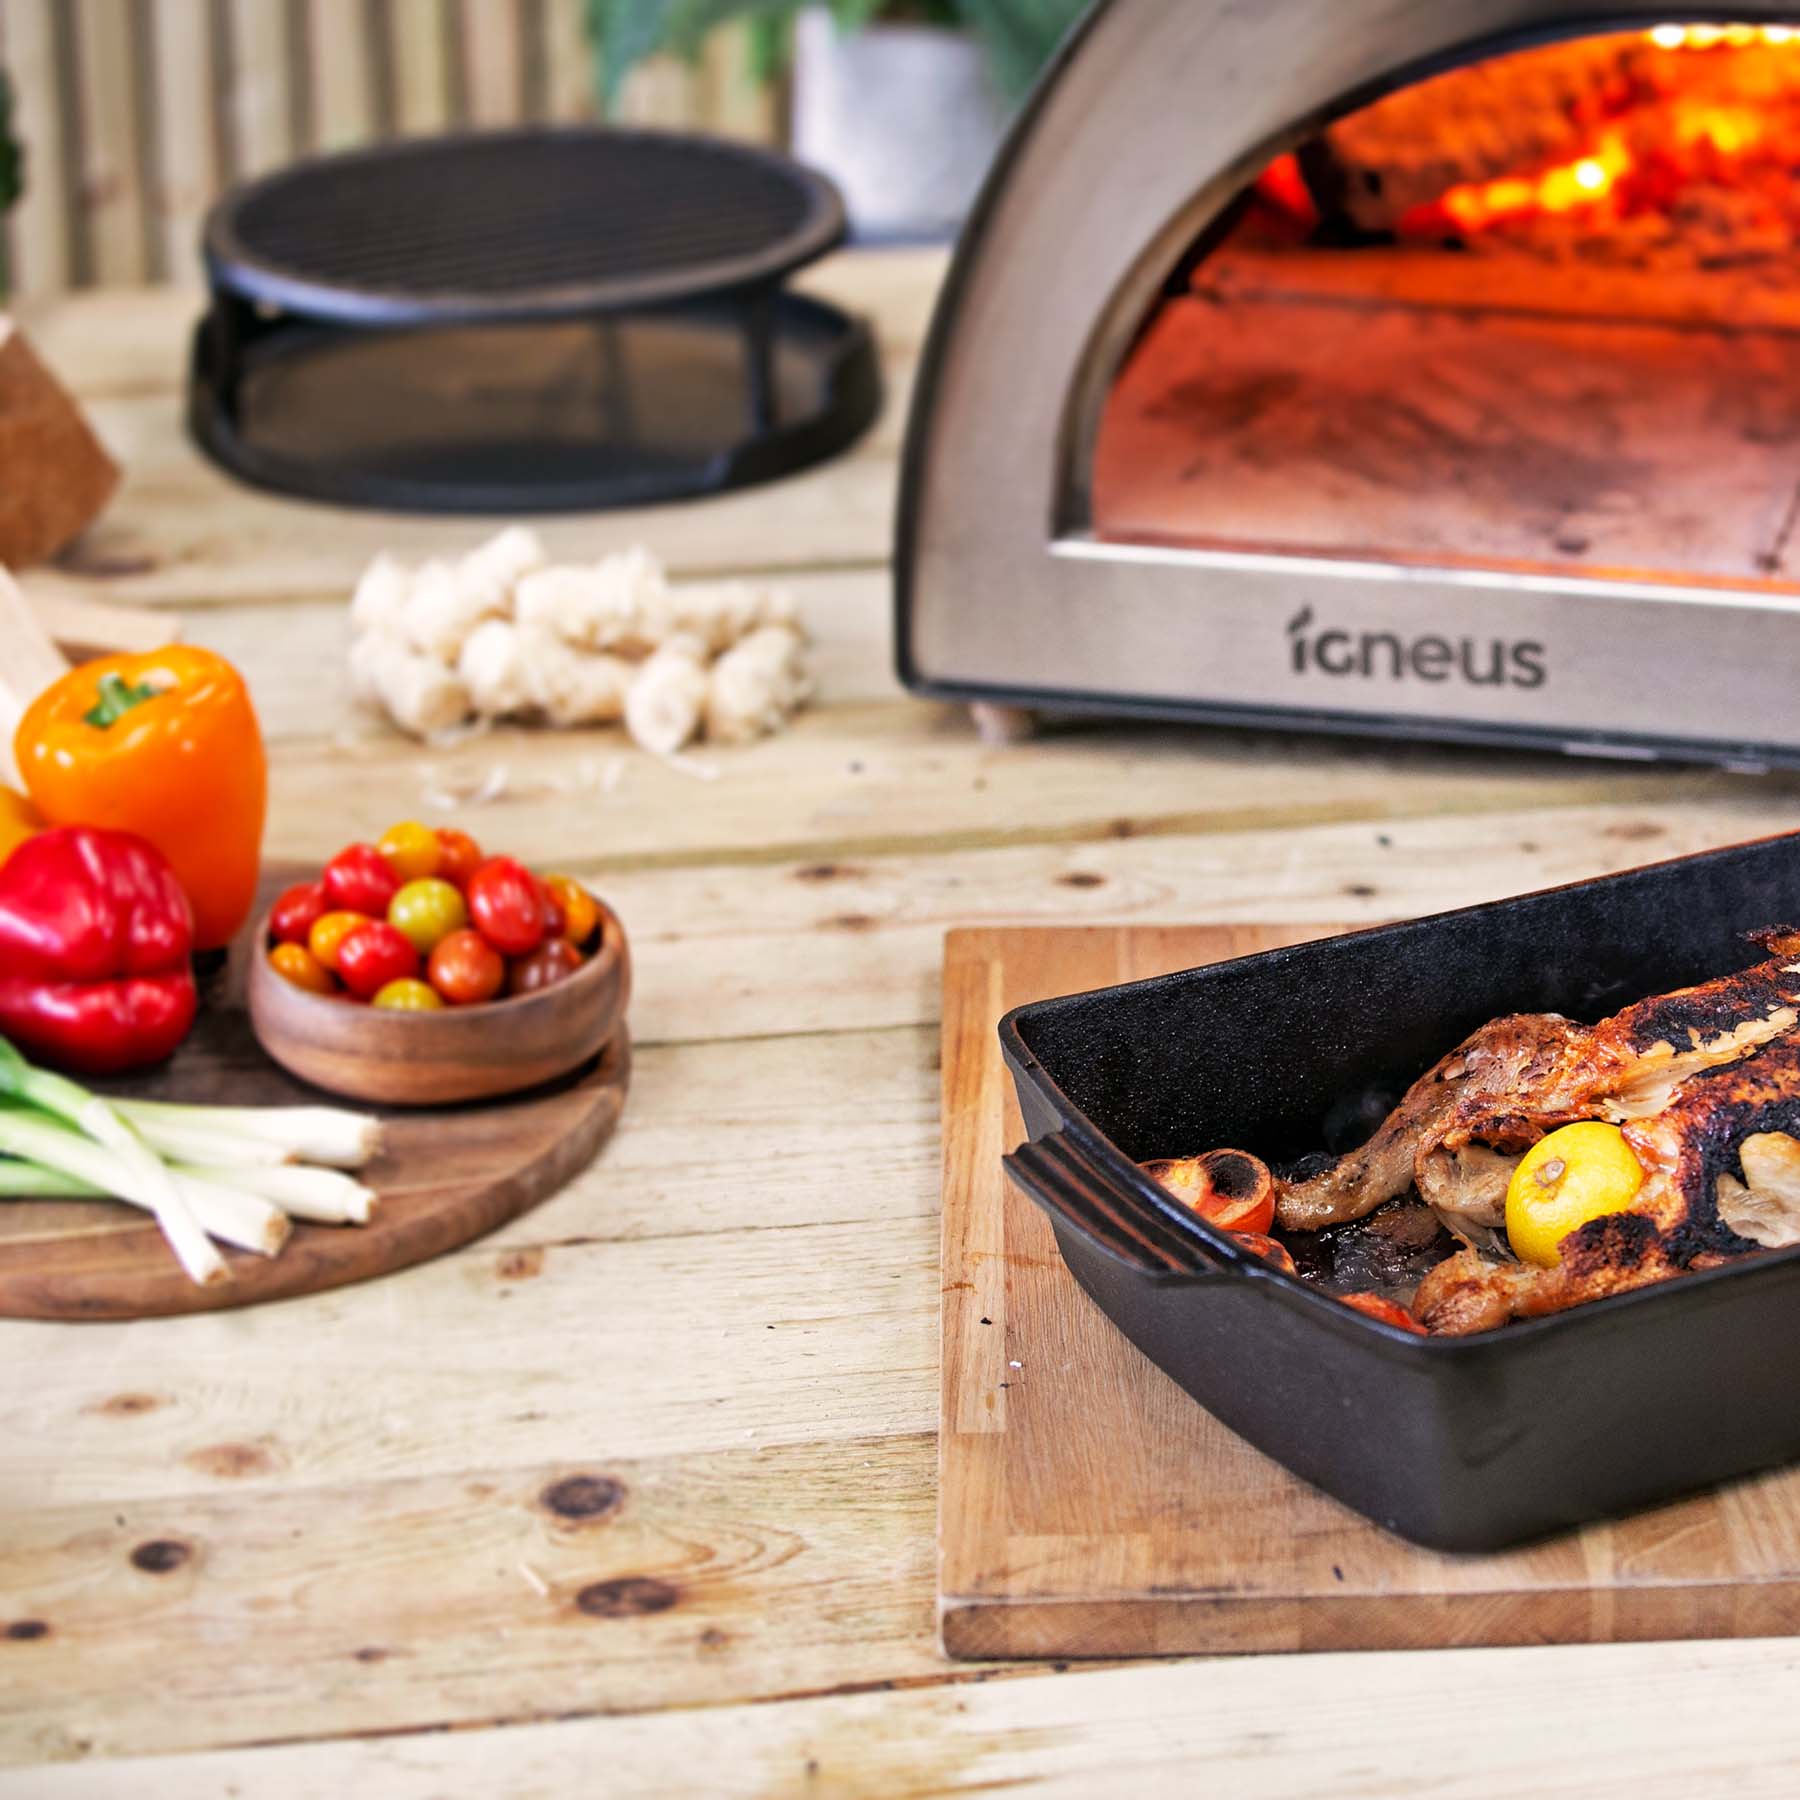 https://www.igneuswoodfiredovens.com/wp-content/uploads/2023/03/Igneus-Cast-Iron-Roasting-Pan-Igneus-wood-fired-pizza-ovens-pizza-oven-accessories-roast-chicken-.jpg